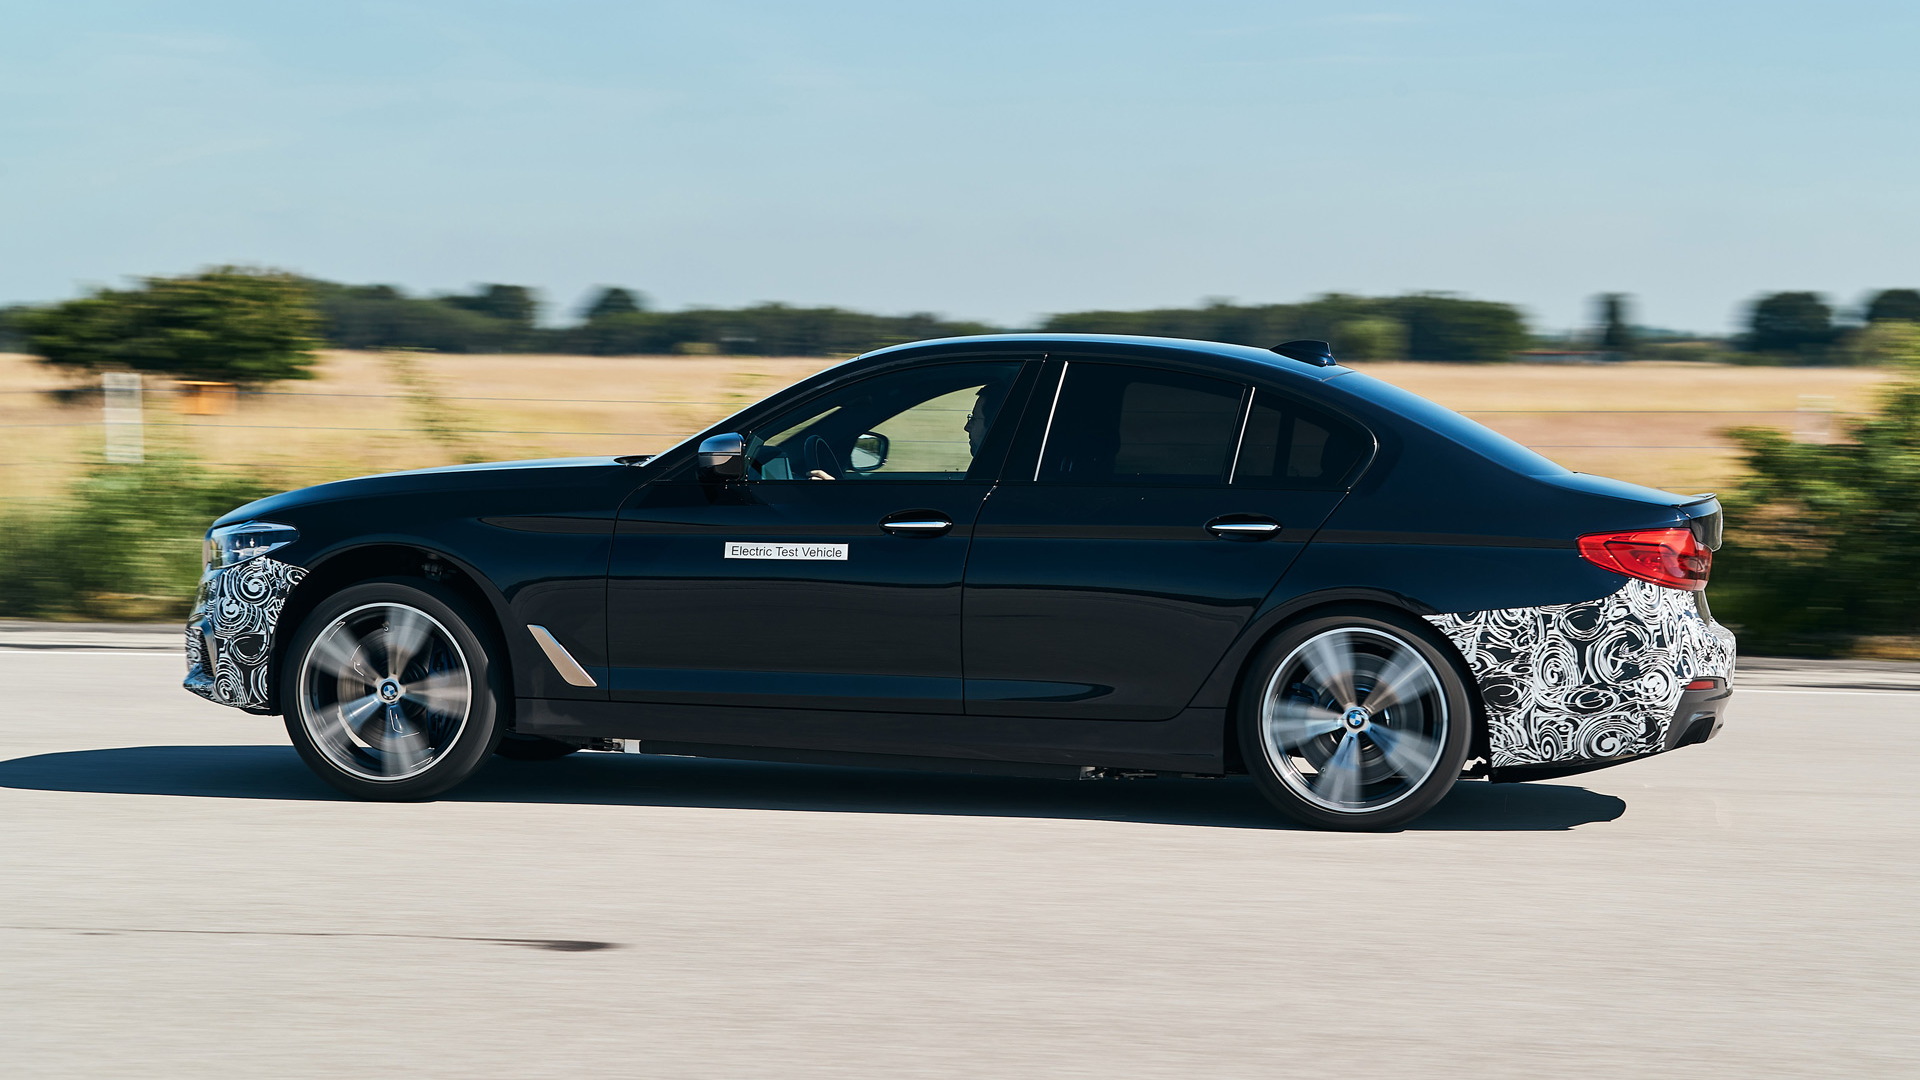 BMW 5-Series test mule fitted with fifth-generation electric drive system